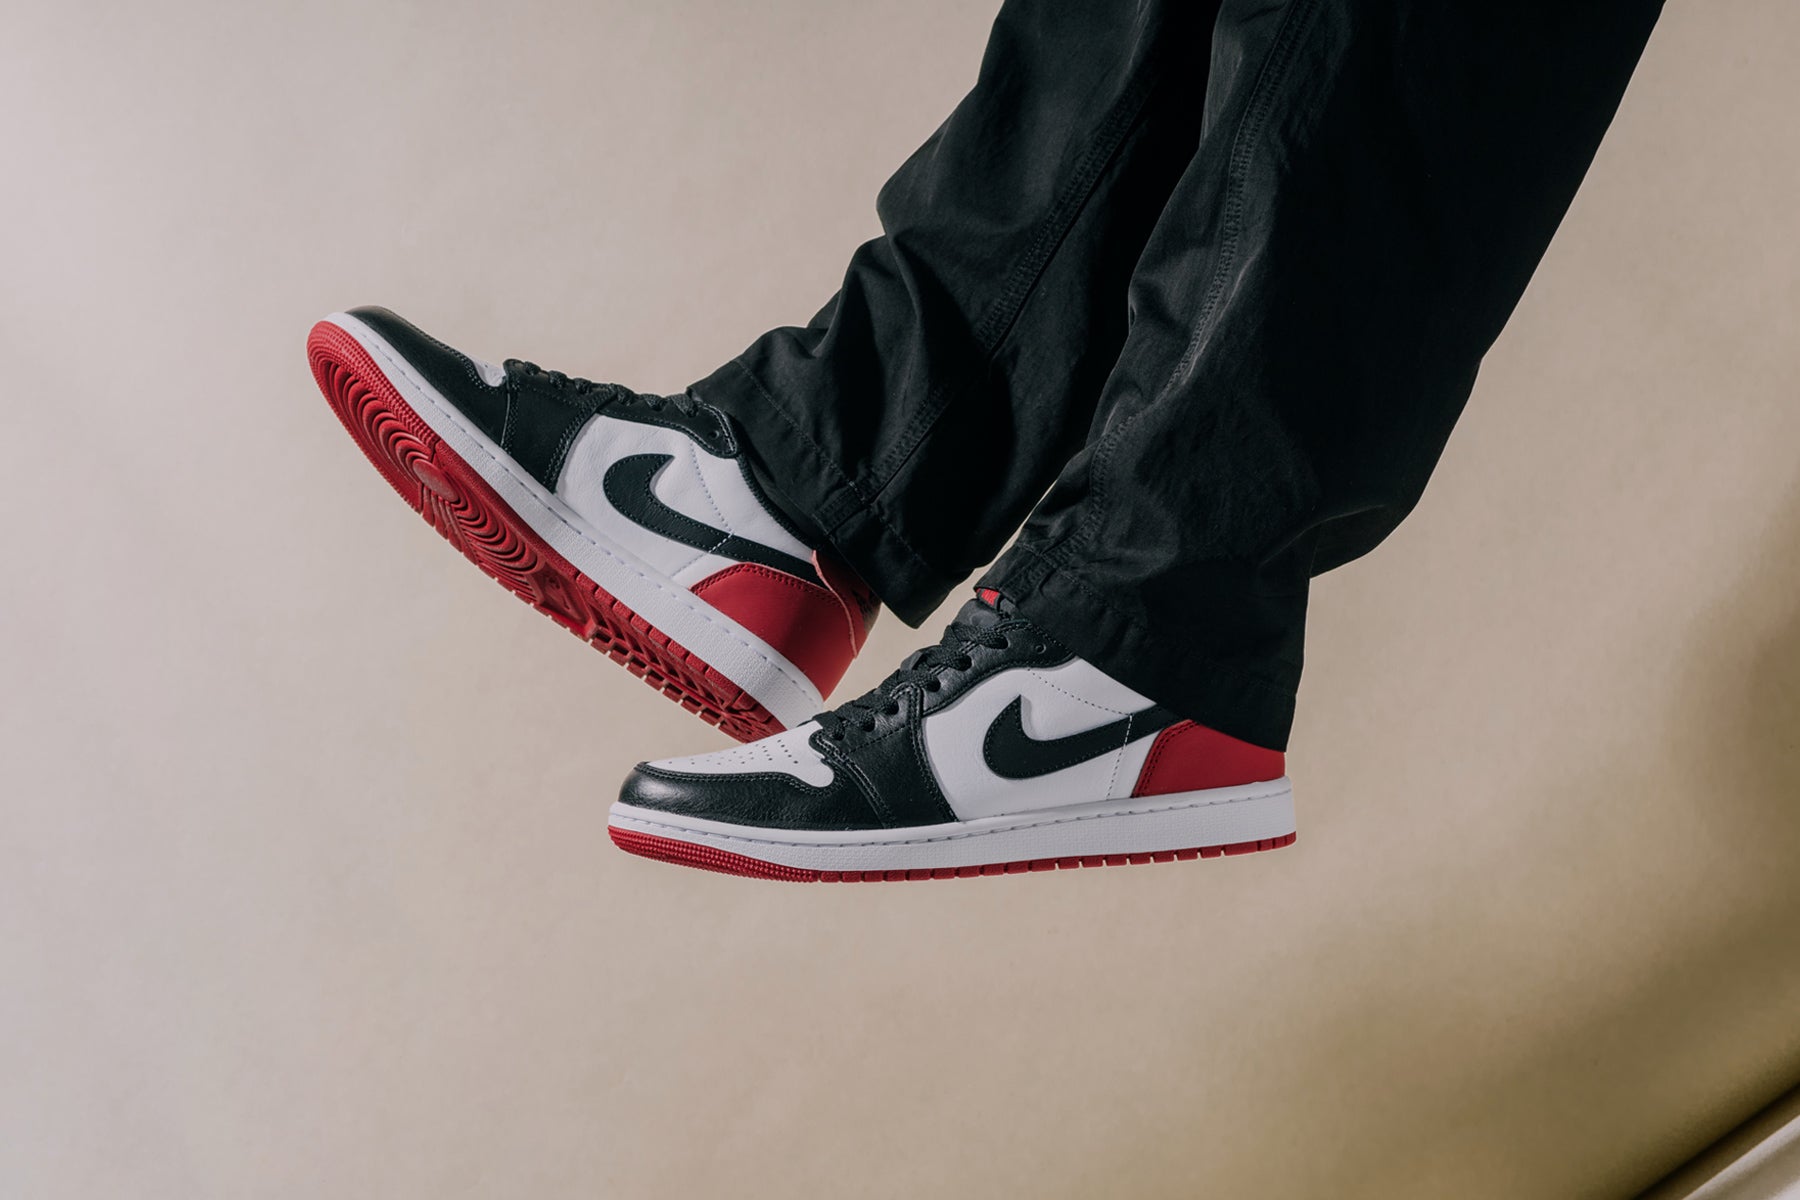 Take Your First Look at the Air Jordan 1 Low OG Black Toe